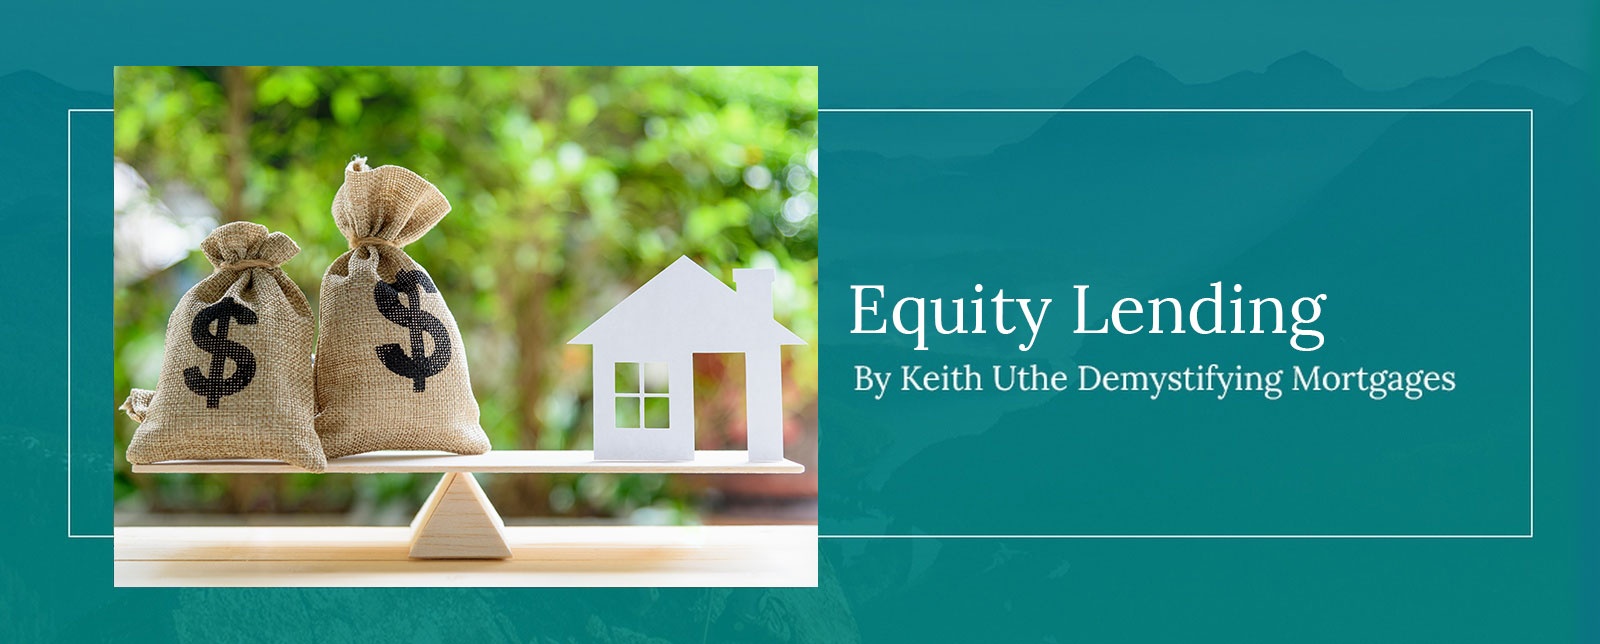 Keith Uthe Demystifying Mortgages - Equity Mortgage Lending in Medicine Hat, Calgary, Alberta